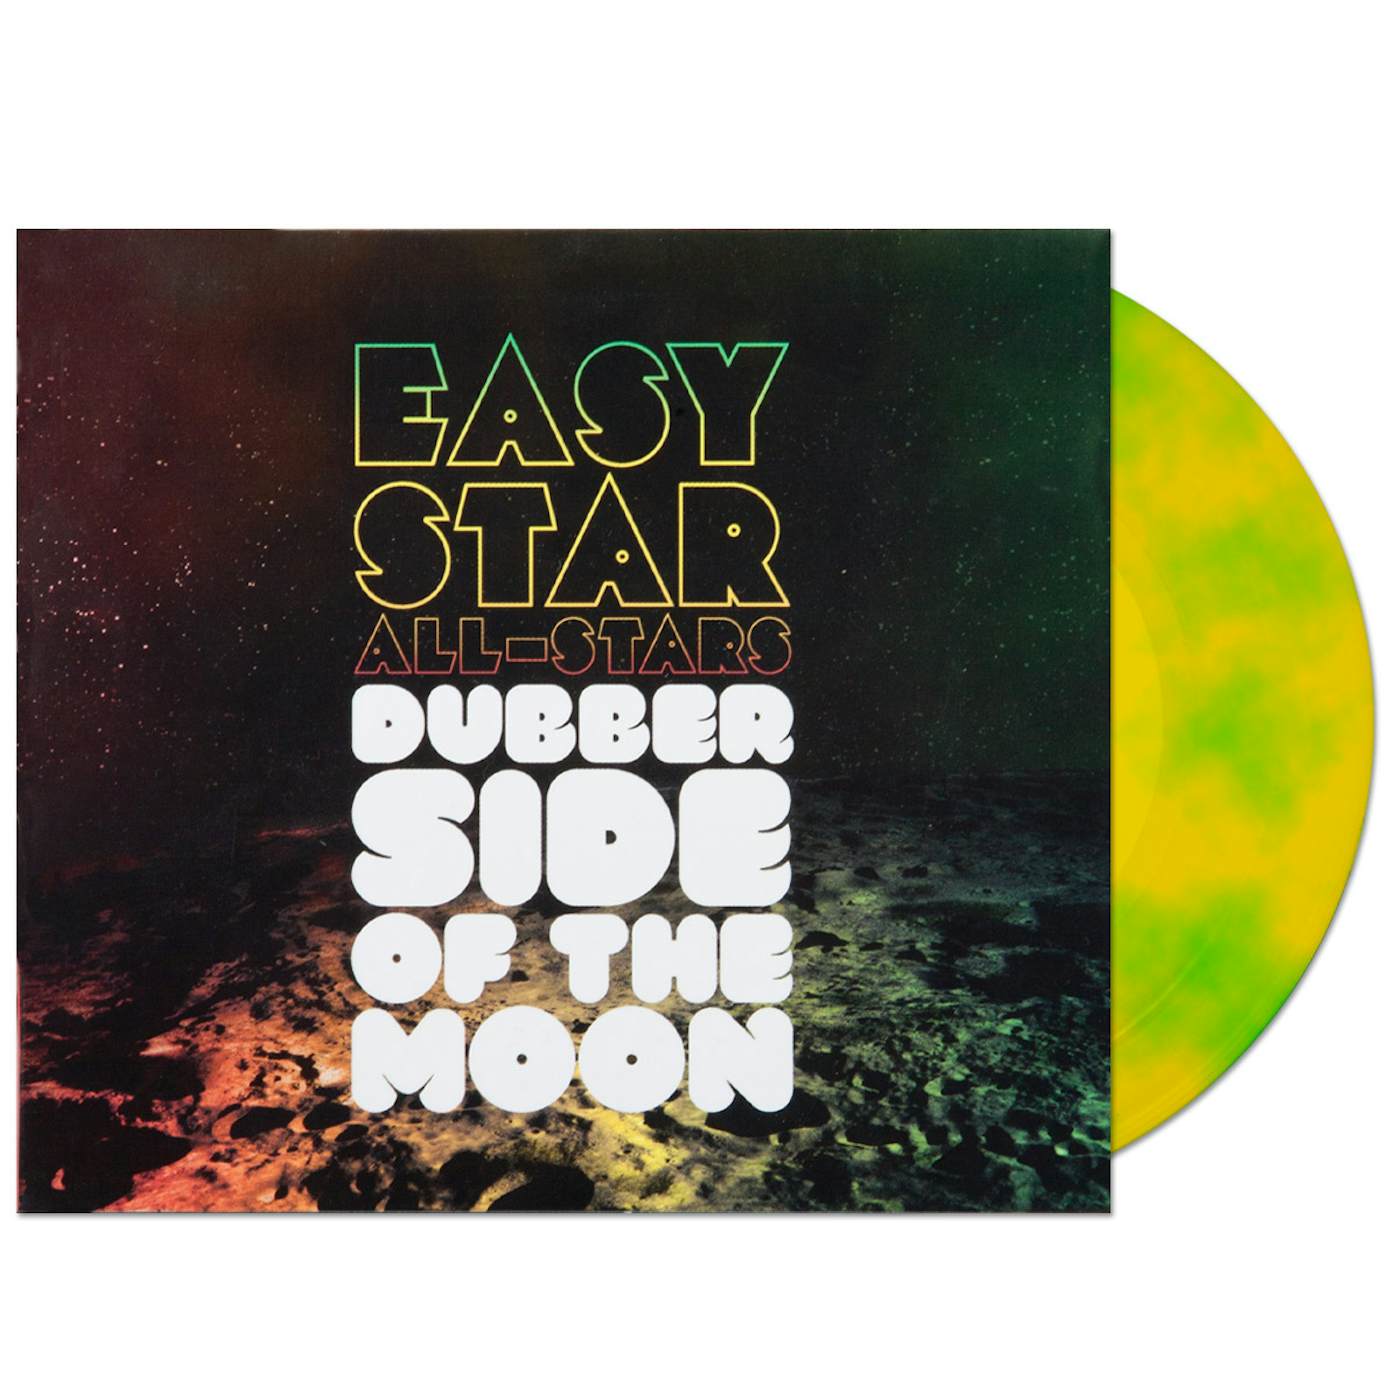 Easy Star Records Dubber Side of the Moon LP (Vinyl)